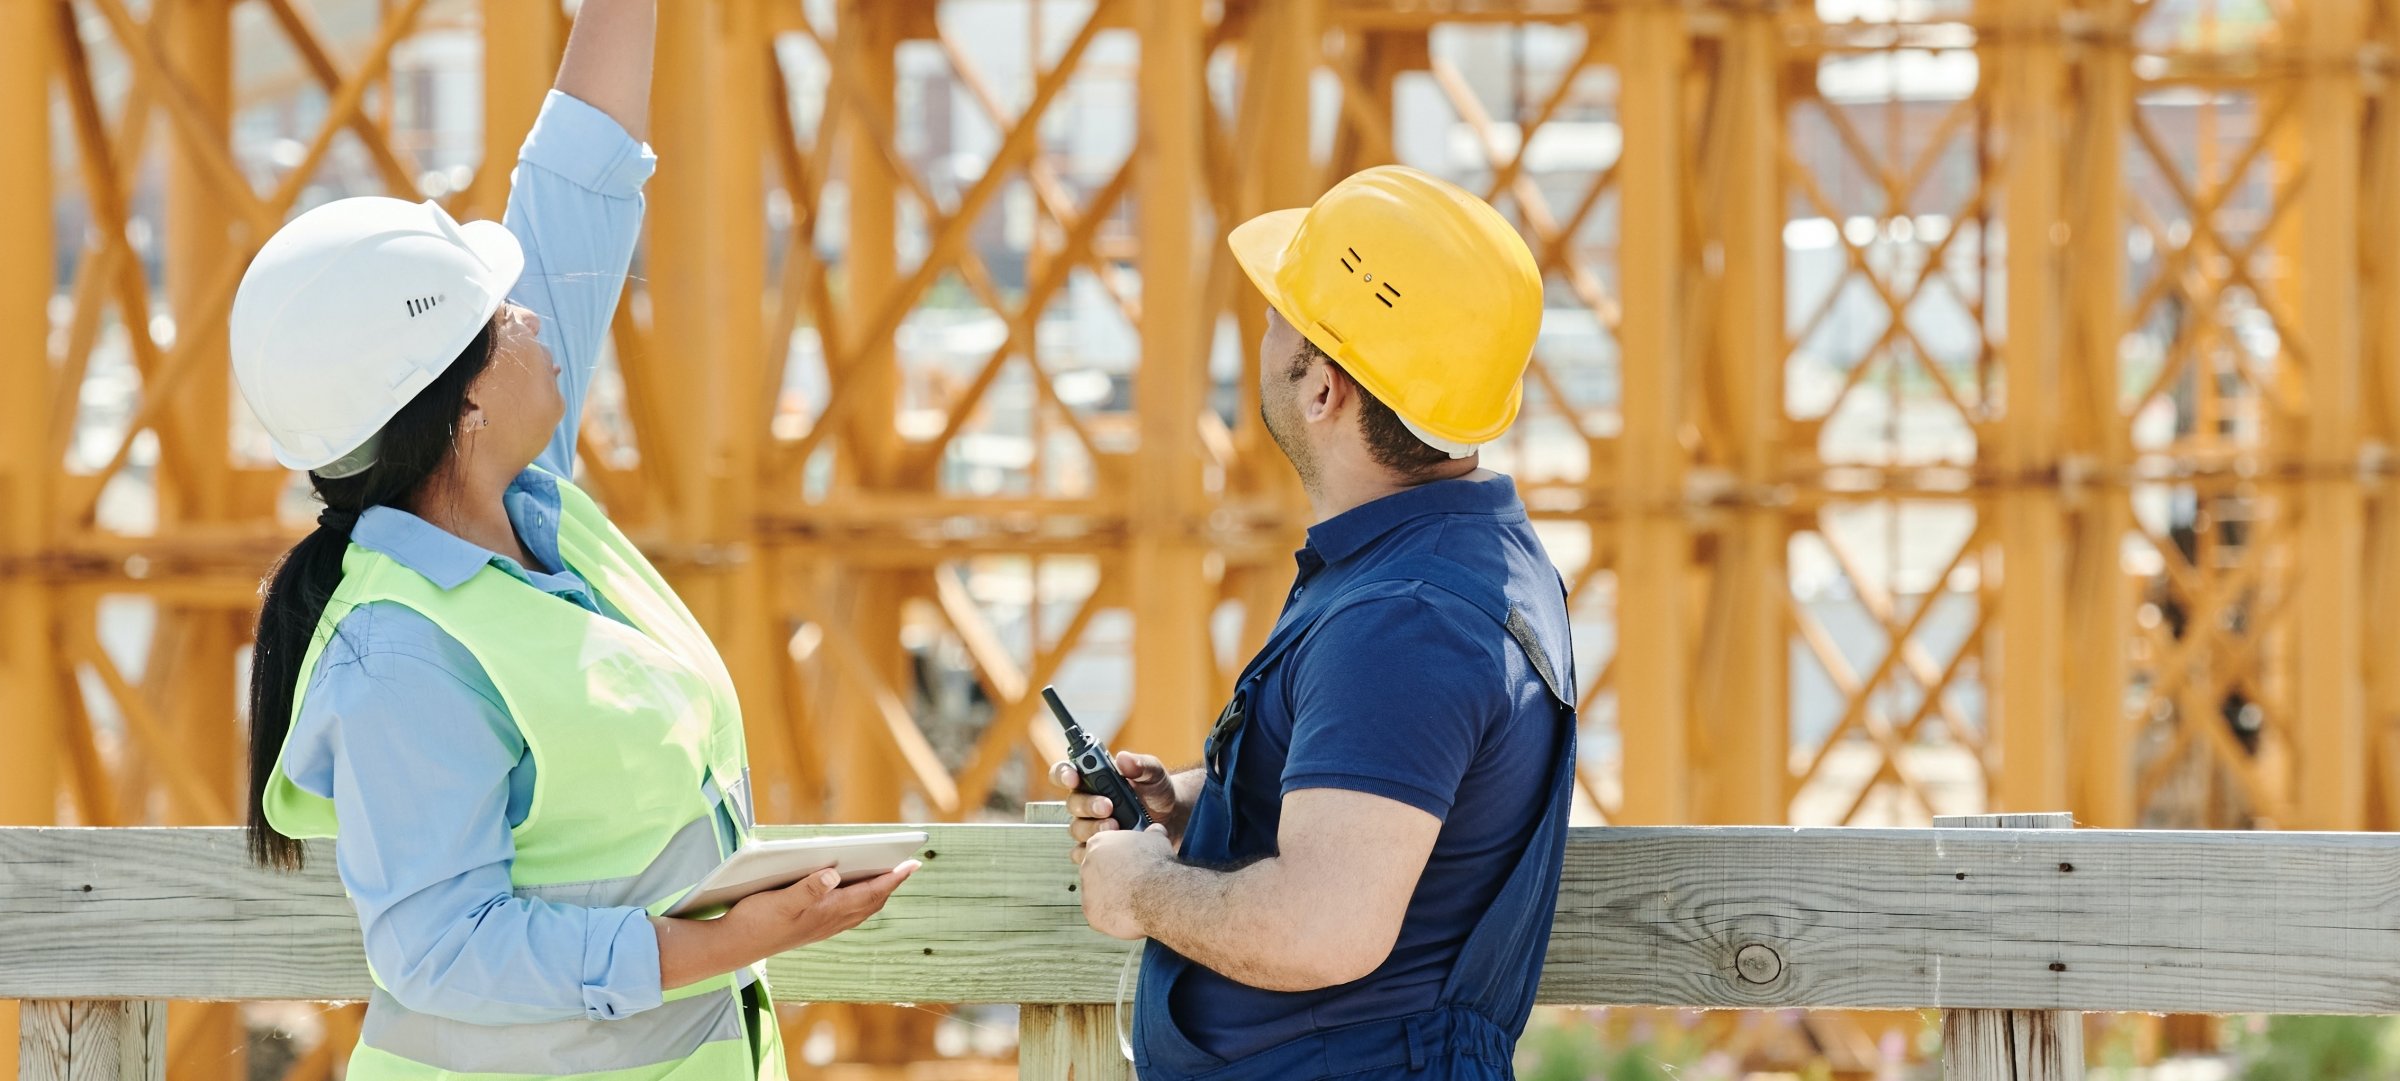 Construction management involves teams and planning.